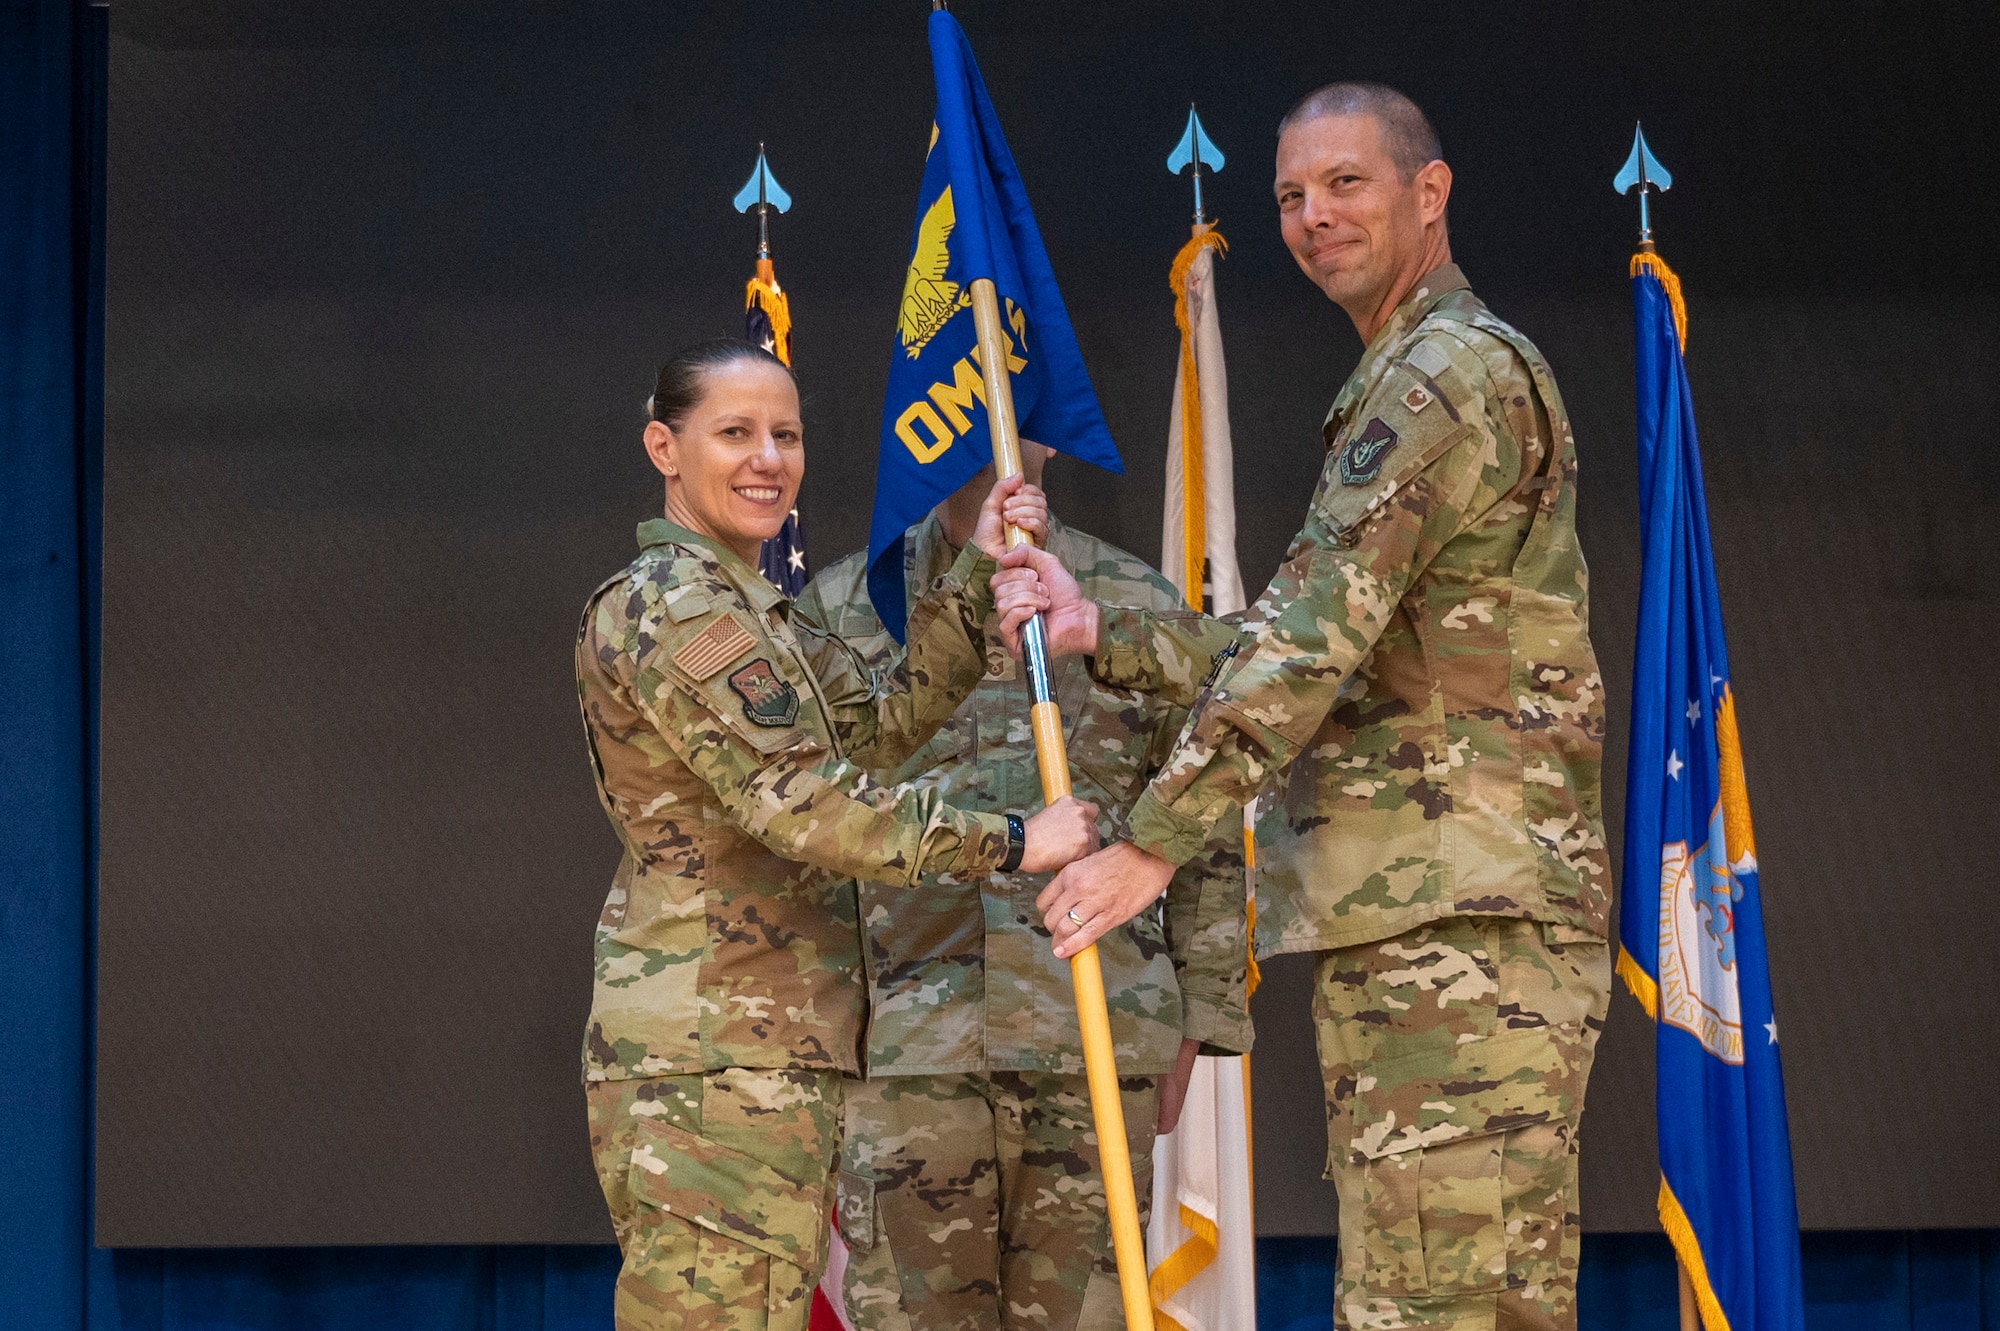 U.S. Air Force Col. Jennifer Vecchione, left, 51st Medical Group commander, presents the guidon to Lt. Col. Jamie Cornett, 51st Operational Medical Readiness Squadron incoming commander, as a symbol of his taking command of the 51st OMRS at Osan Air Base, Republic of Korea, June 8, 2023. Prior to taking command, Cornett served as the 36th Healthcare Operations Squadron commander, Anderson Air Force Base, Guam. (U.S. Air Force photo by Airman 1st Class Aaron Edwards)